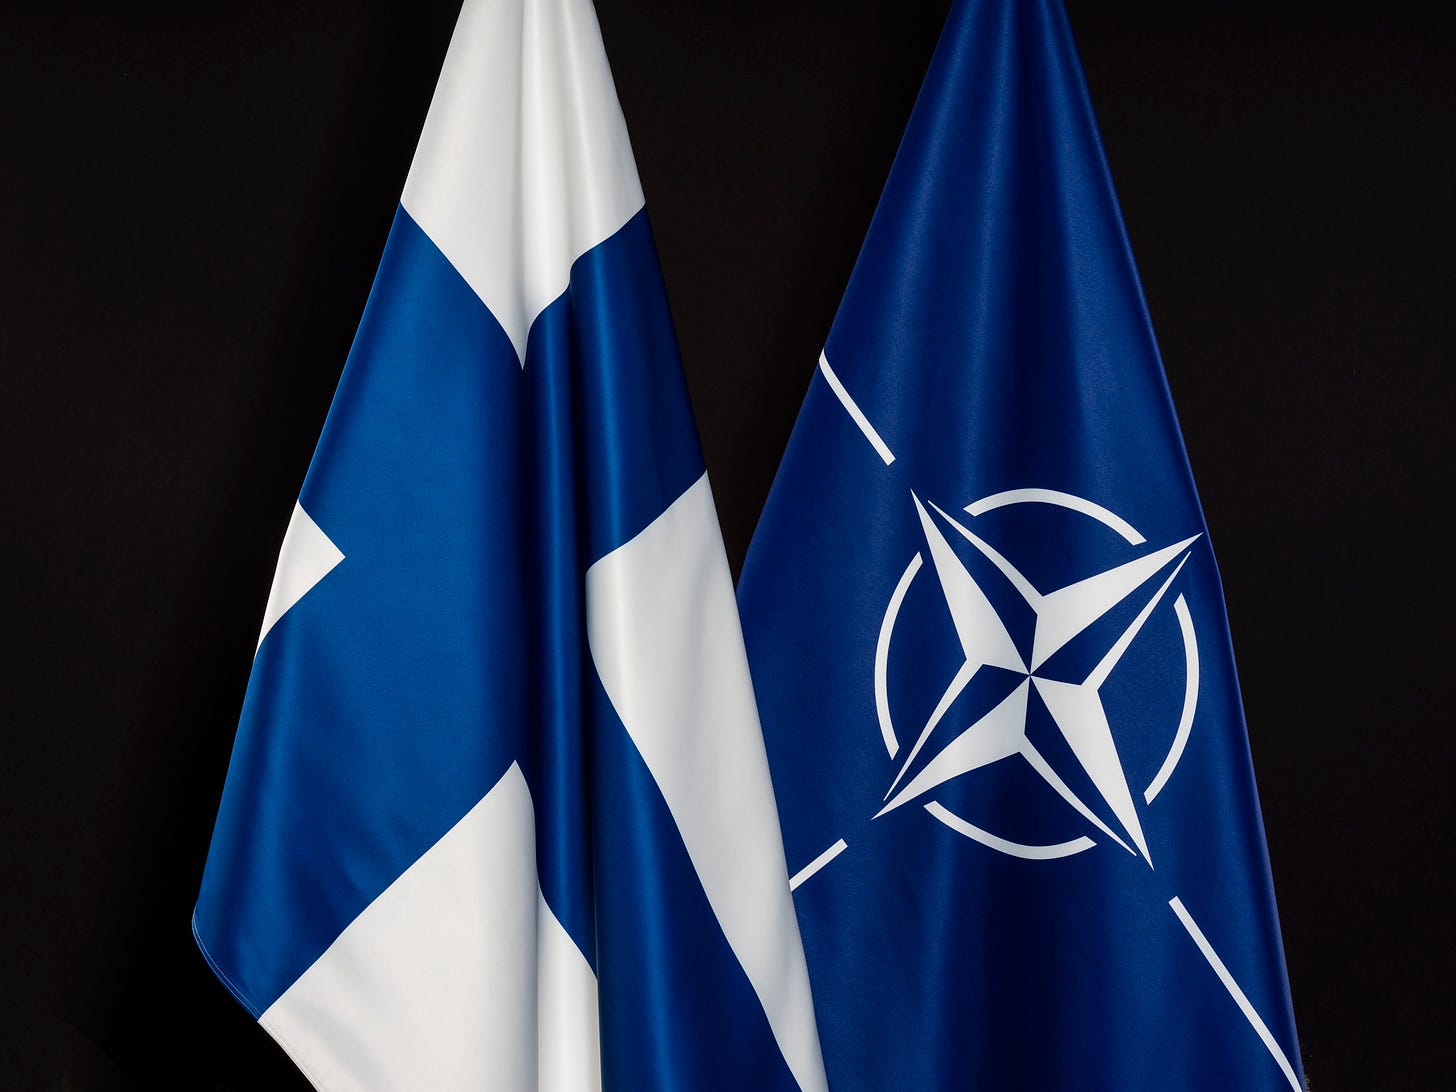 Finland and NATO flags (Image: Twitter/@NATOpress)